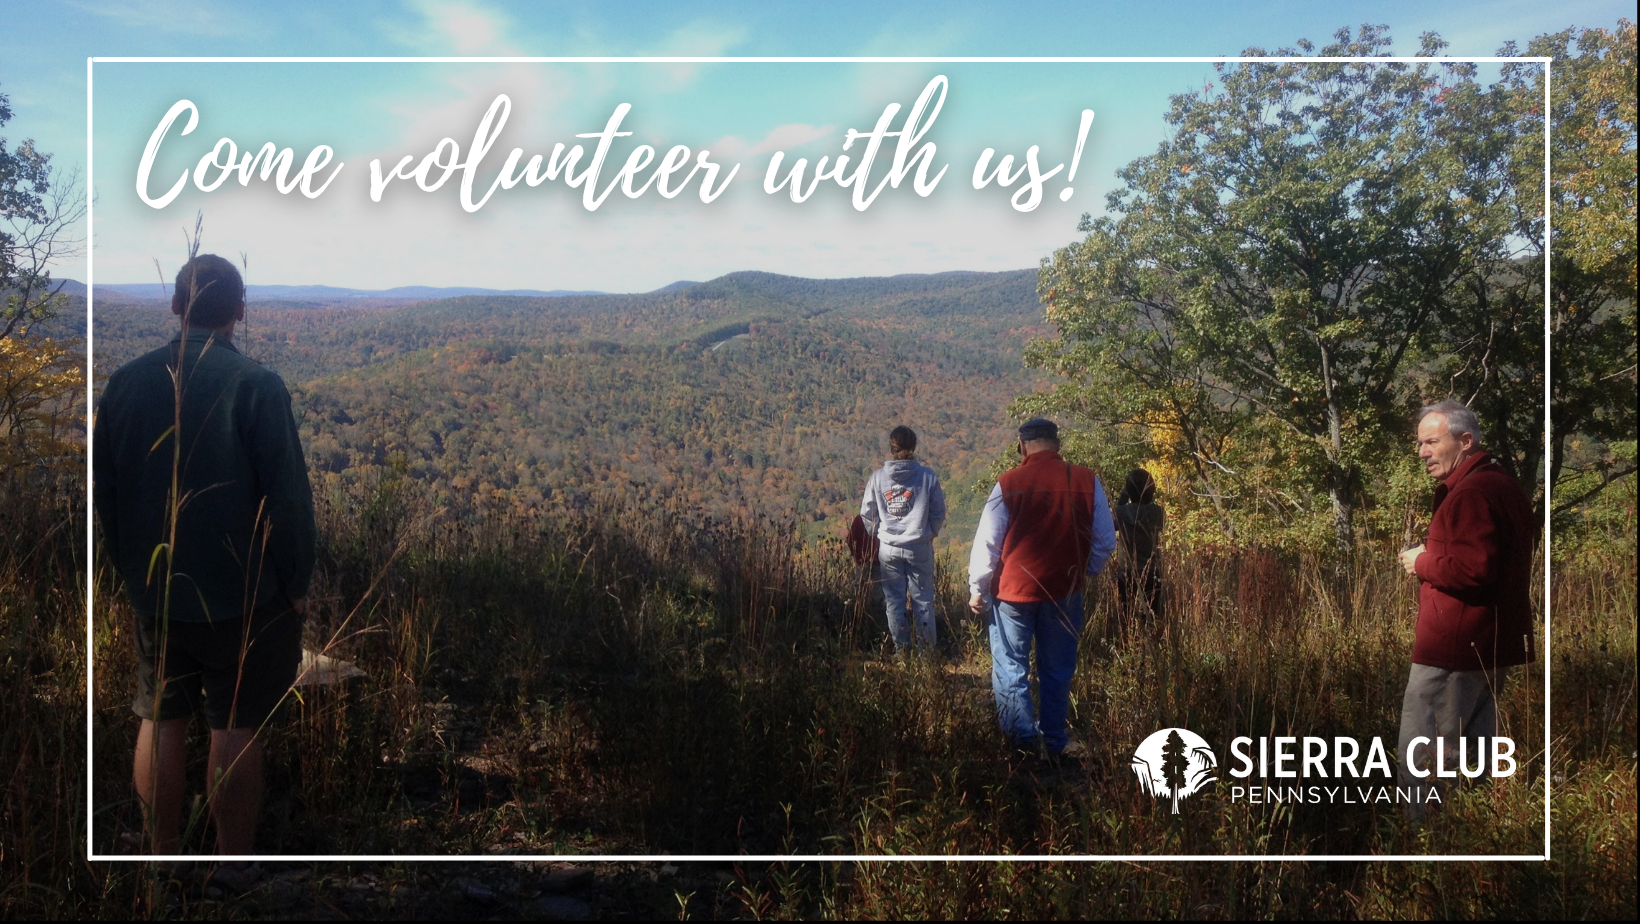 Sierra Club PA outing participants in front of a forested landscape with the text: Come volunteer with us!